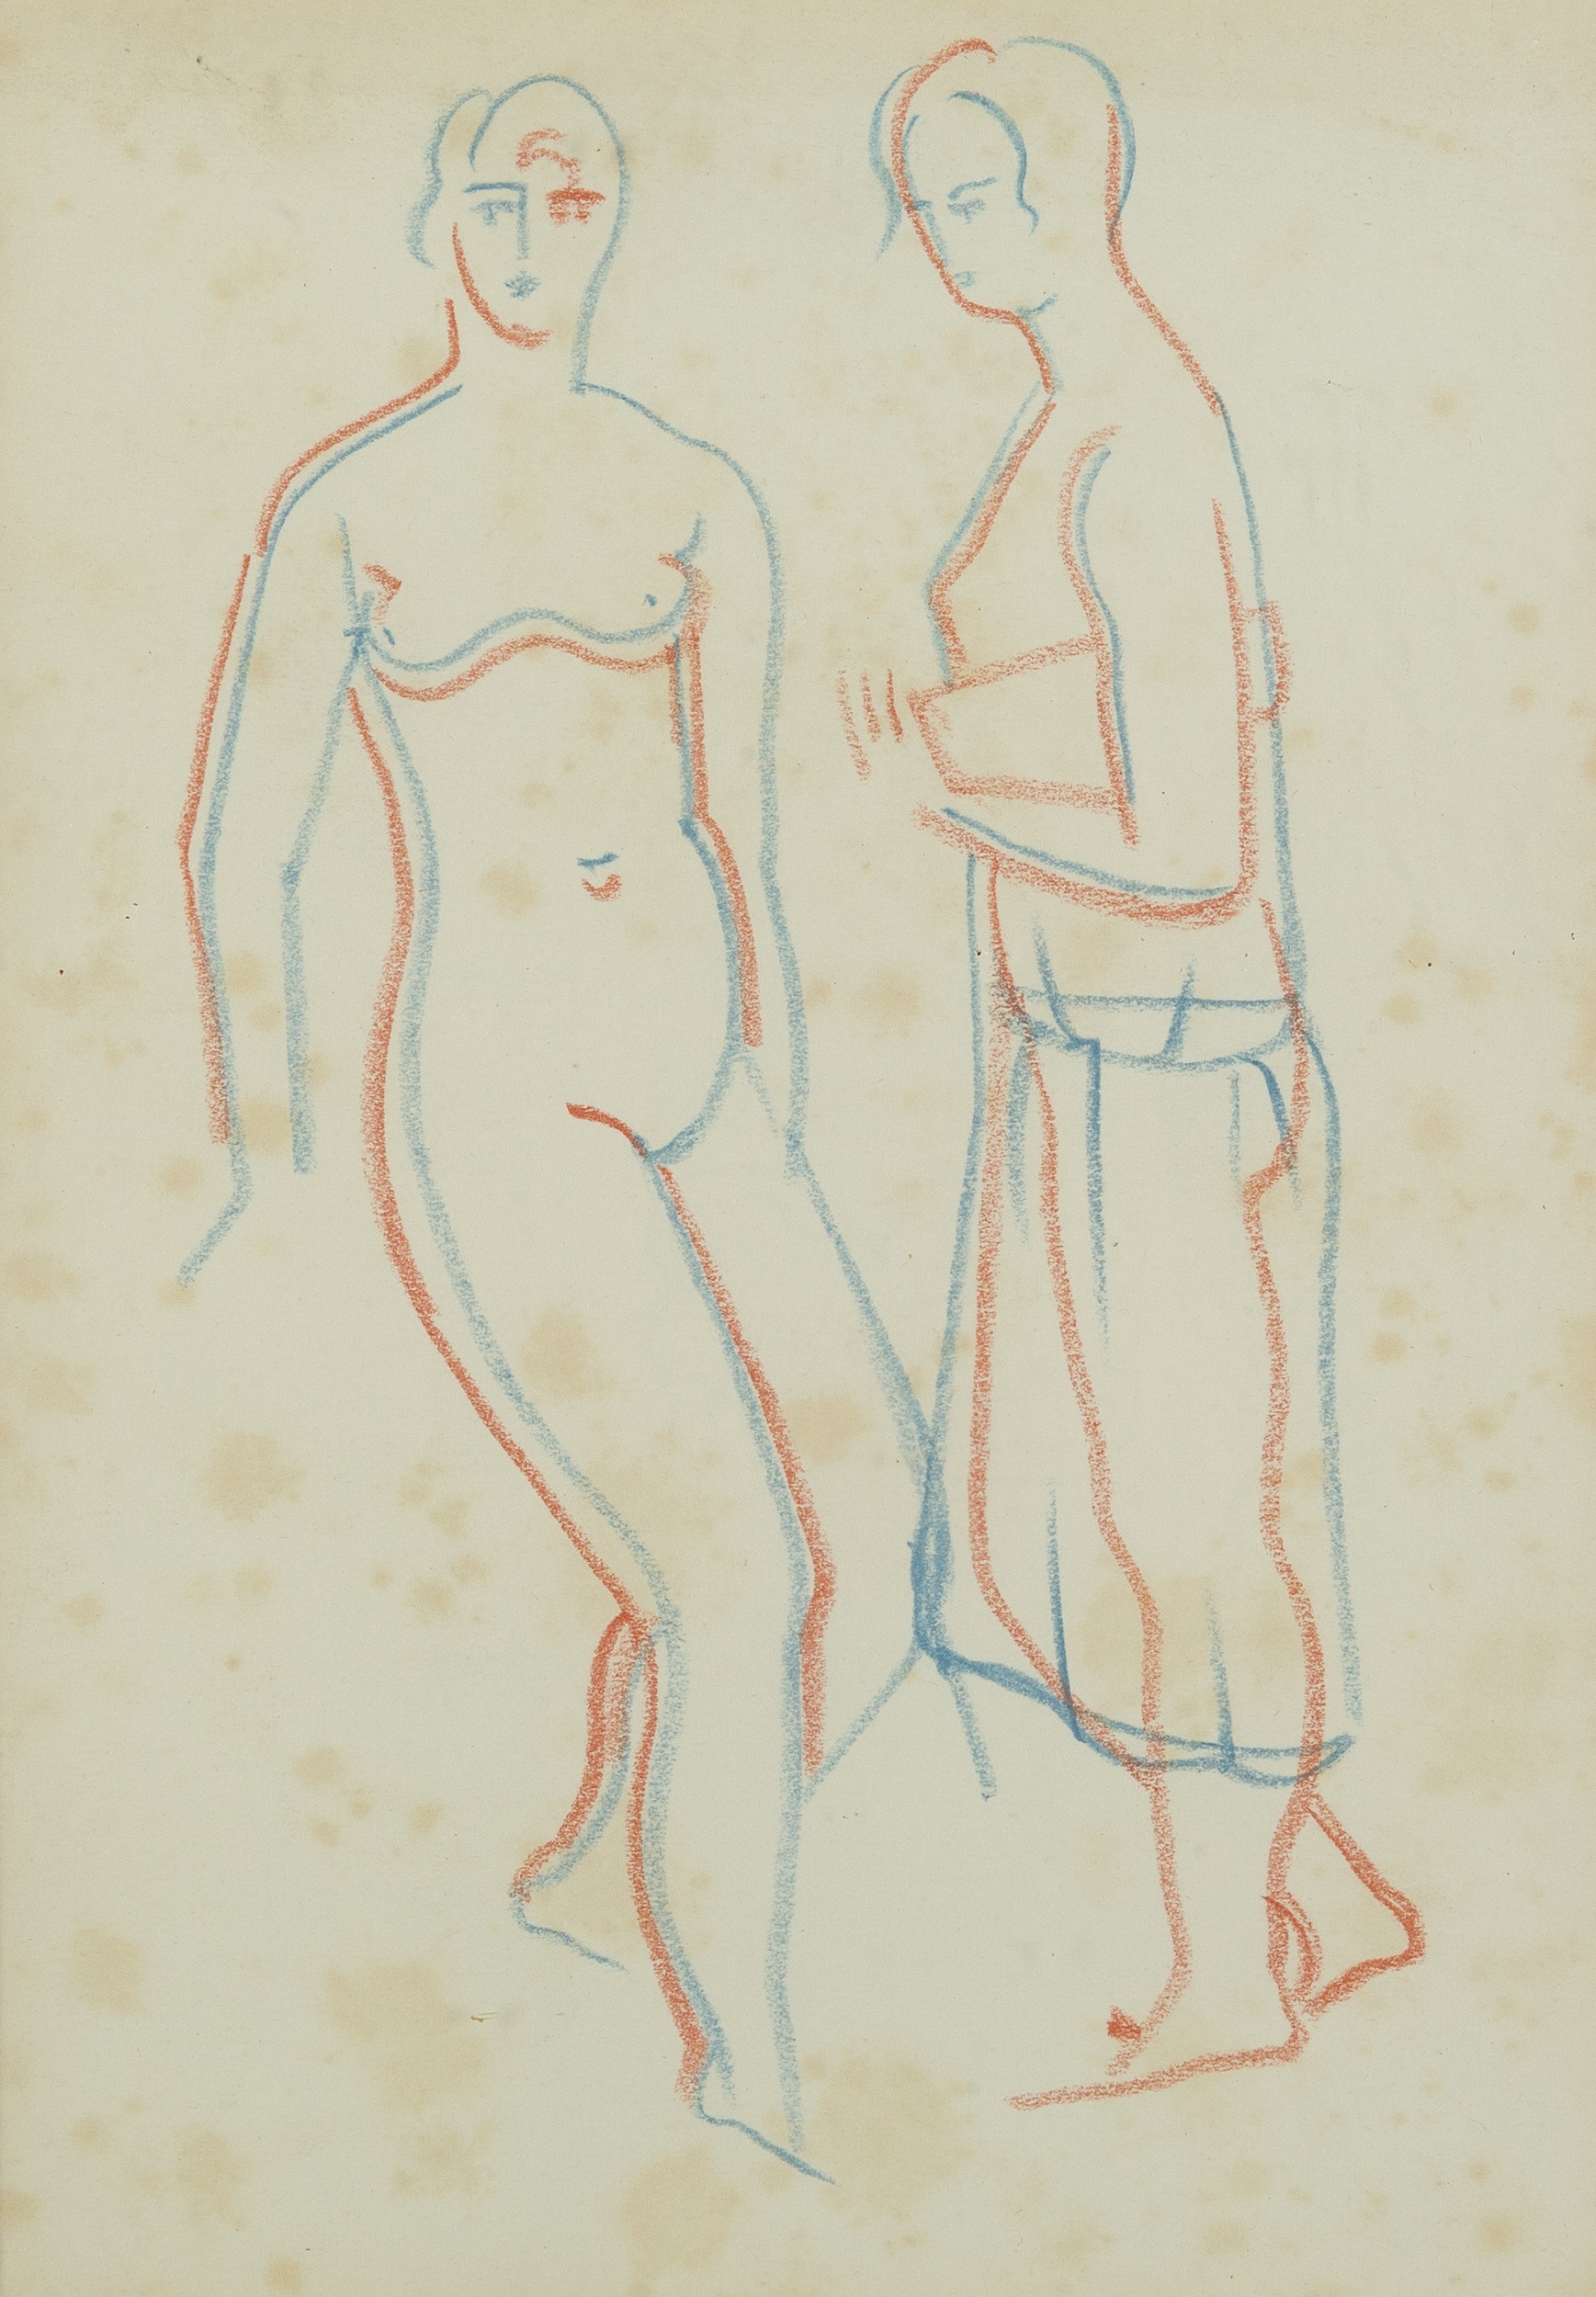 Christopher Wood (1901-1930) Nude & Woman in a Dress coloured crayon on paper 22 x 15cm. Provenance: